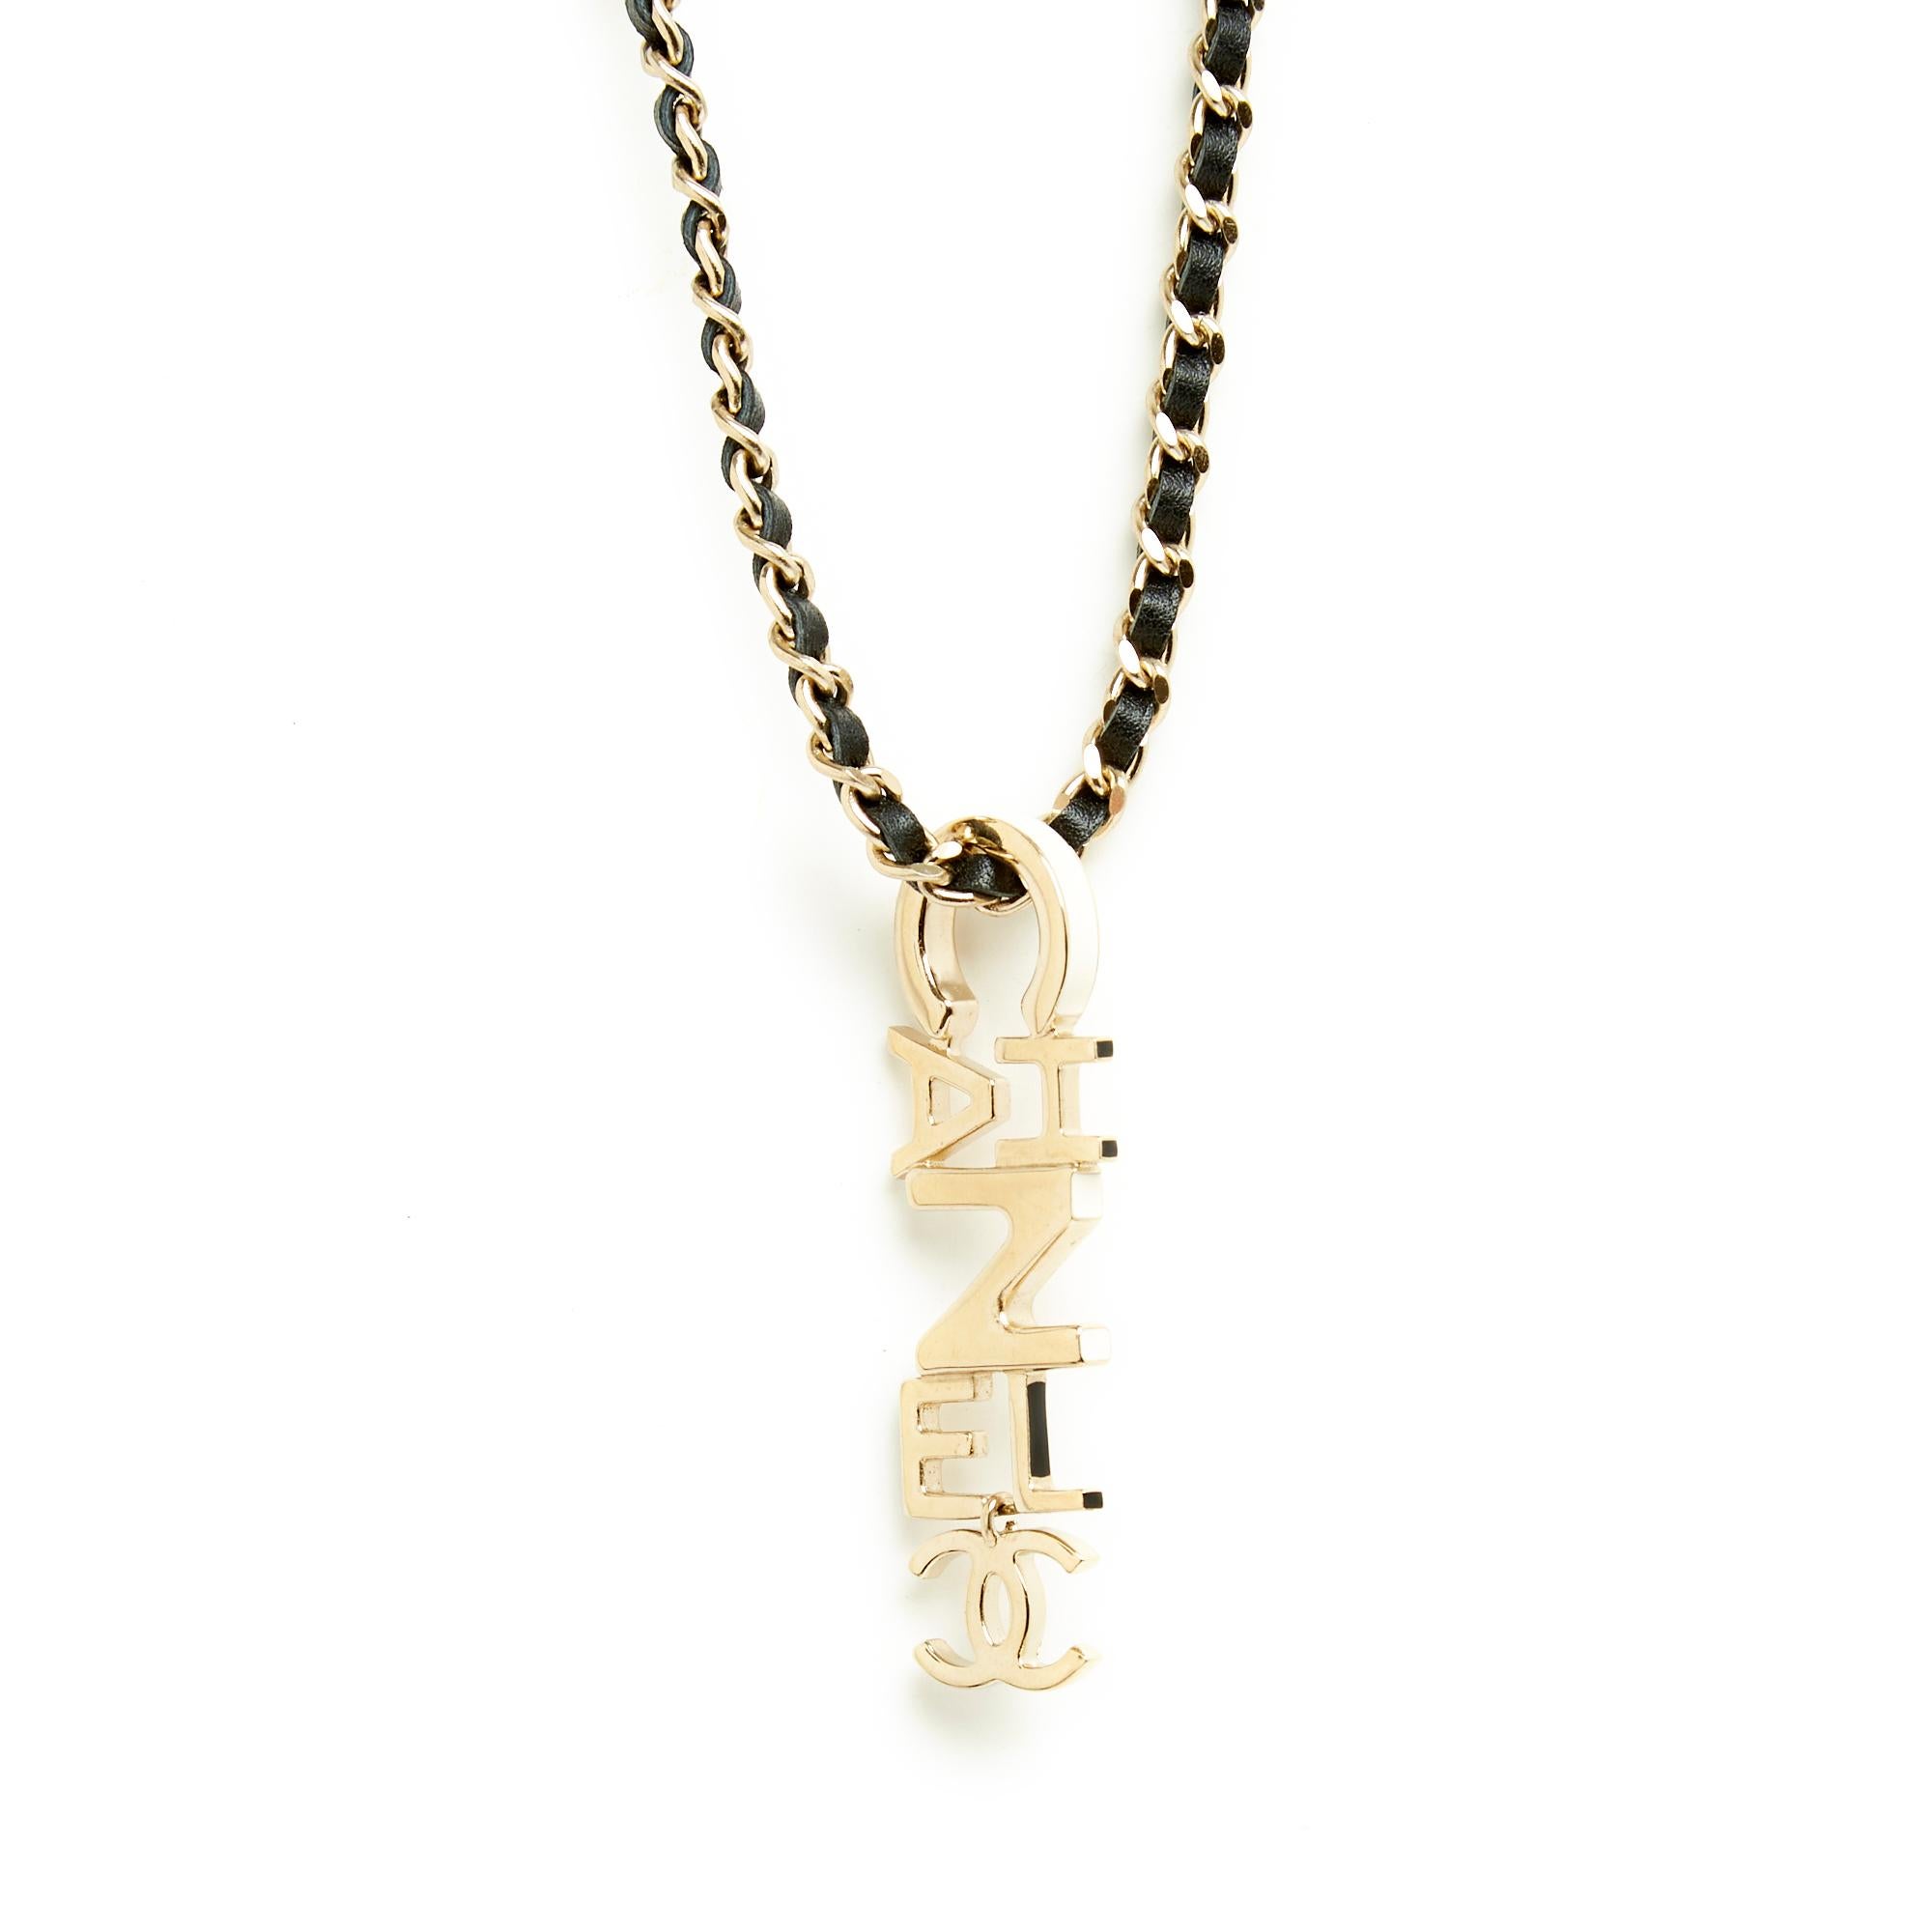 Chanel long necklace or belt collection 2022 in lightly gilded metal composed of a chain interwoven with black leather and a pendant with the letters and logo of Chanel enameled in black or ecru on the edge, closing with a carabiner on a chain